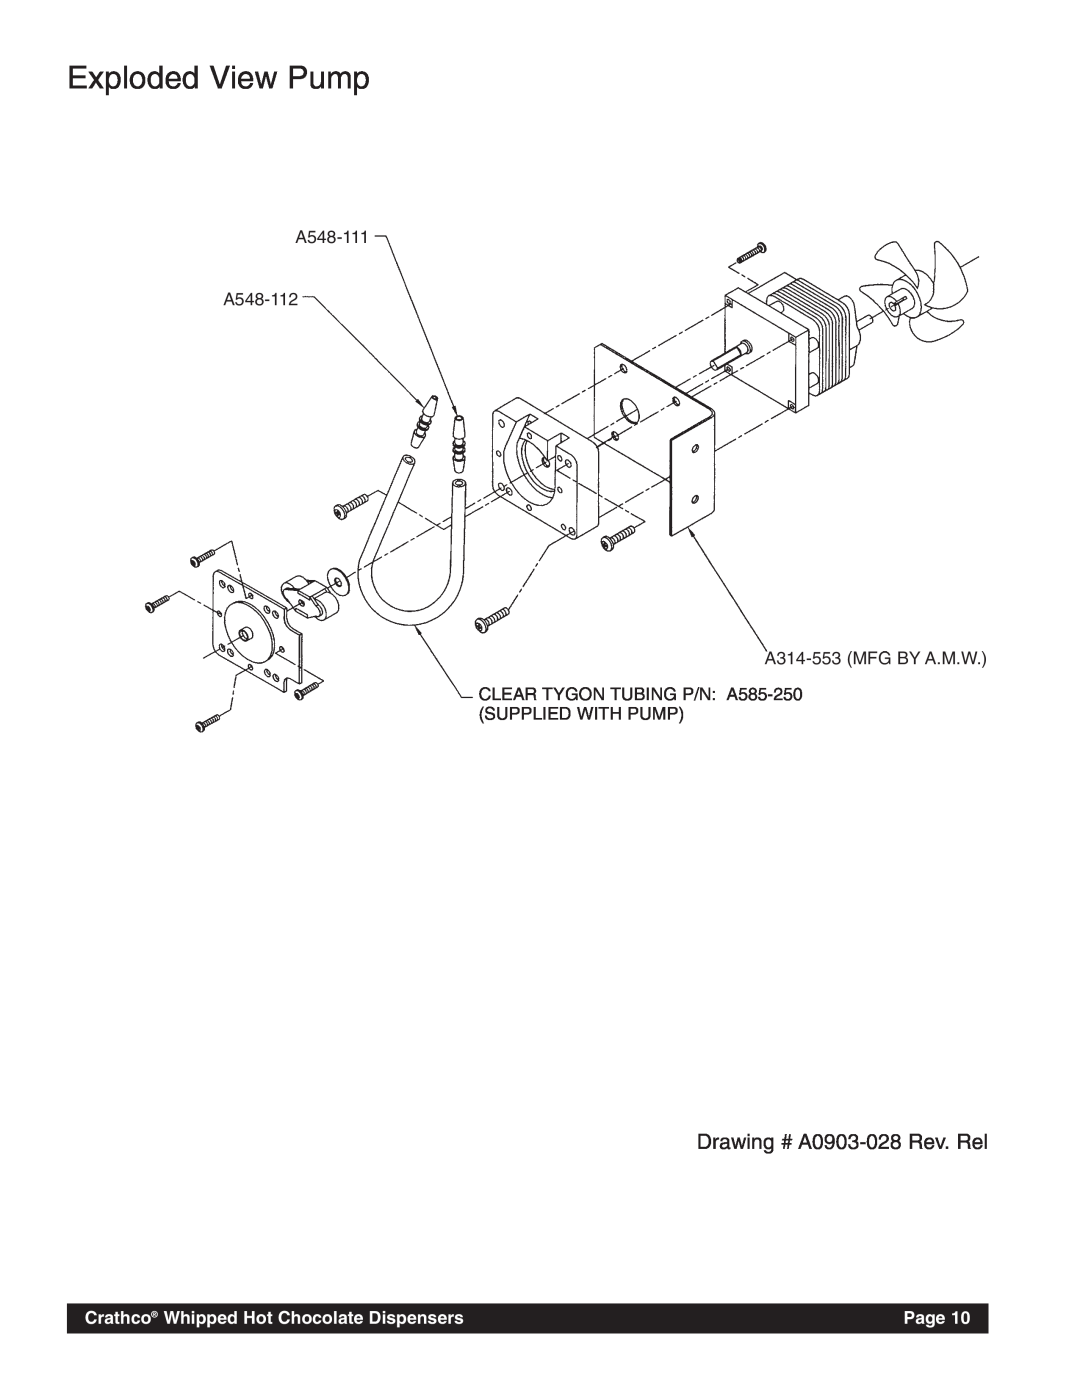 Grindmaster HC-2 Exploded View Pump, Drawing # A0903-028Rev. Rel, Crathco Whipped Hot Chocolate Dispensers, Page 